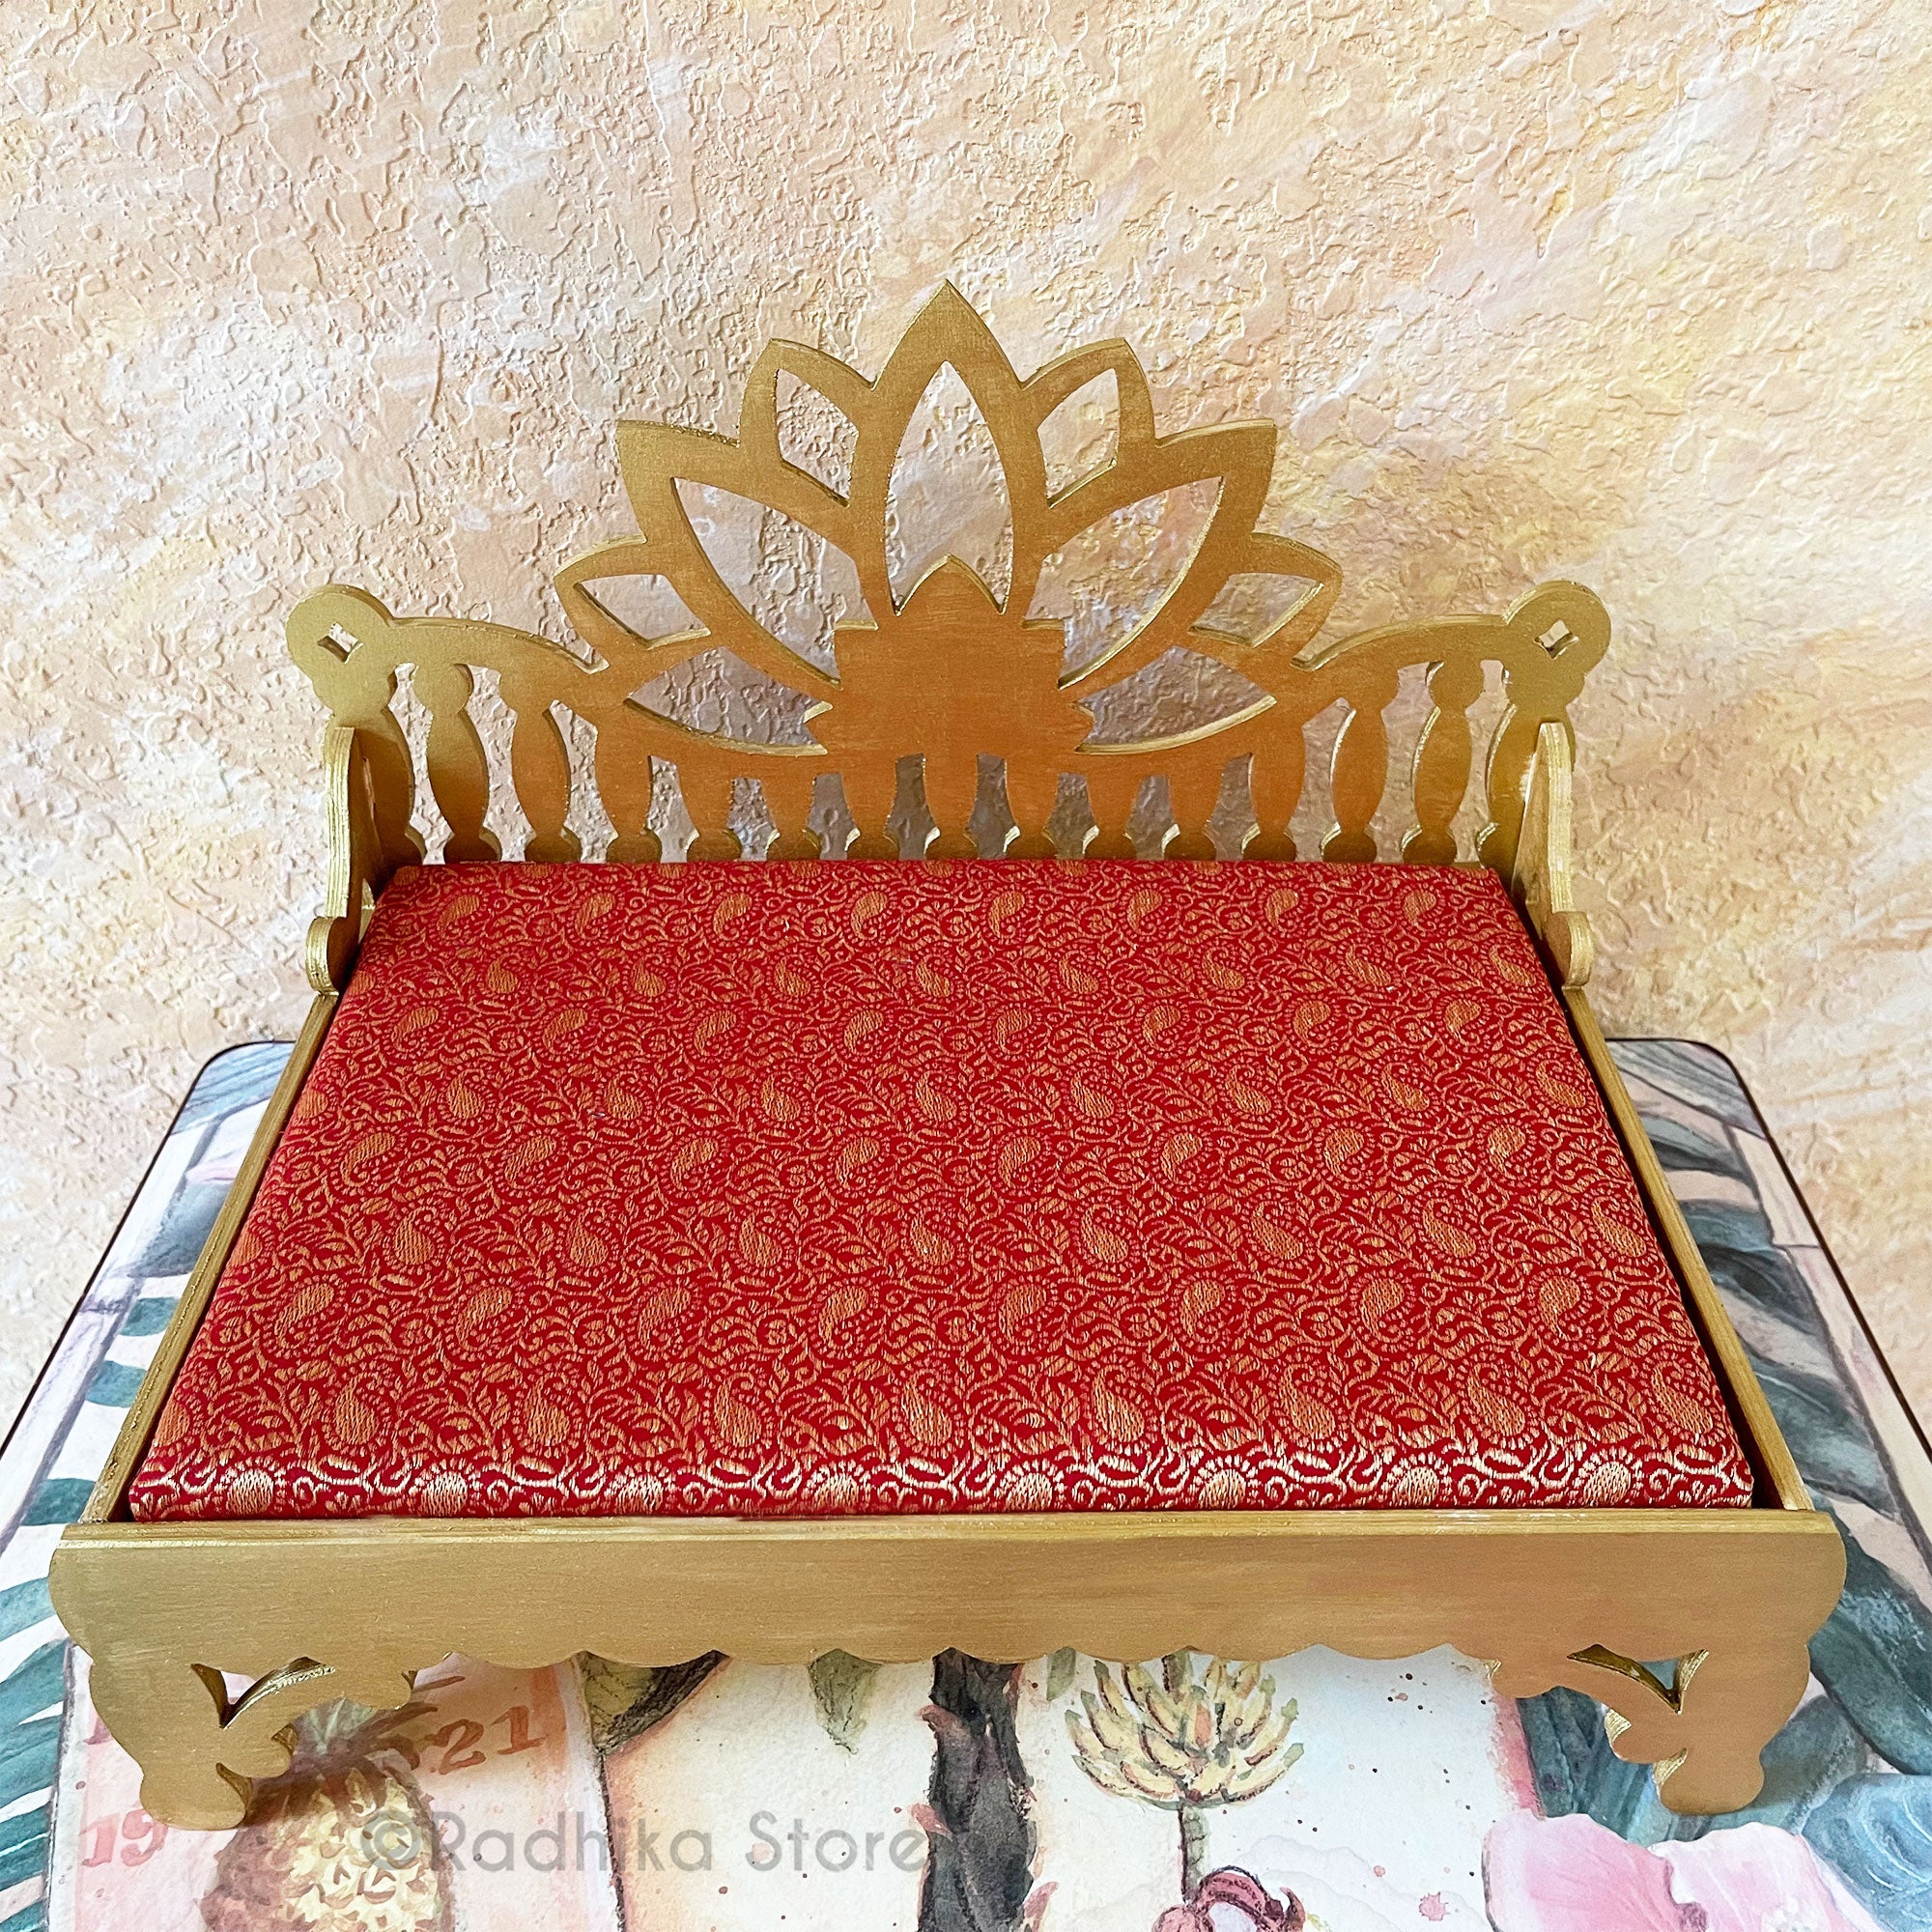 Radha Kund - Divine Golden Throne- Red and Green- Choose - 7" or 9.5" Long